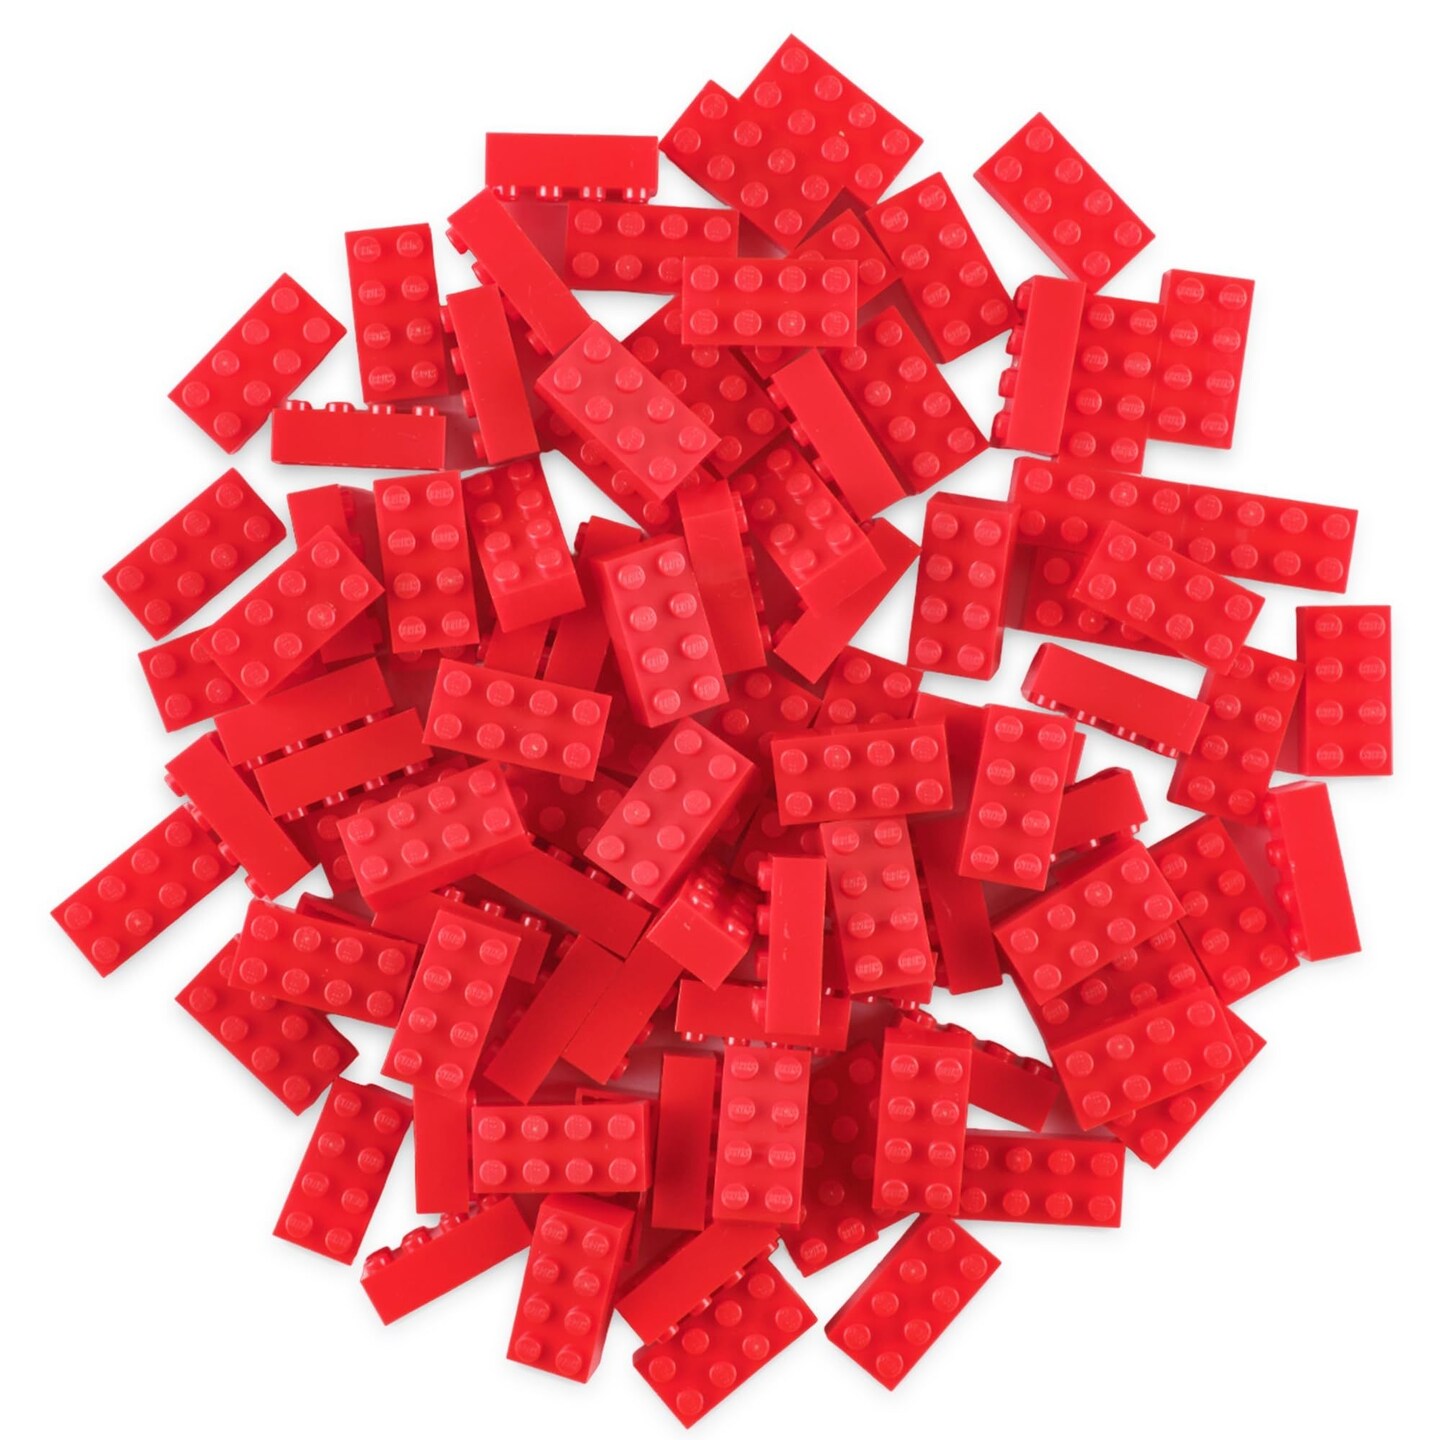 Strictly Briks Classic Bricks Starter Kit, Red, 96 Pieces, 2x4 Inches, Building Creative Play Set for Ages 3 and Up, 100% Compatible with All Major Brick Brands